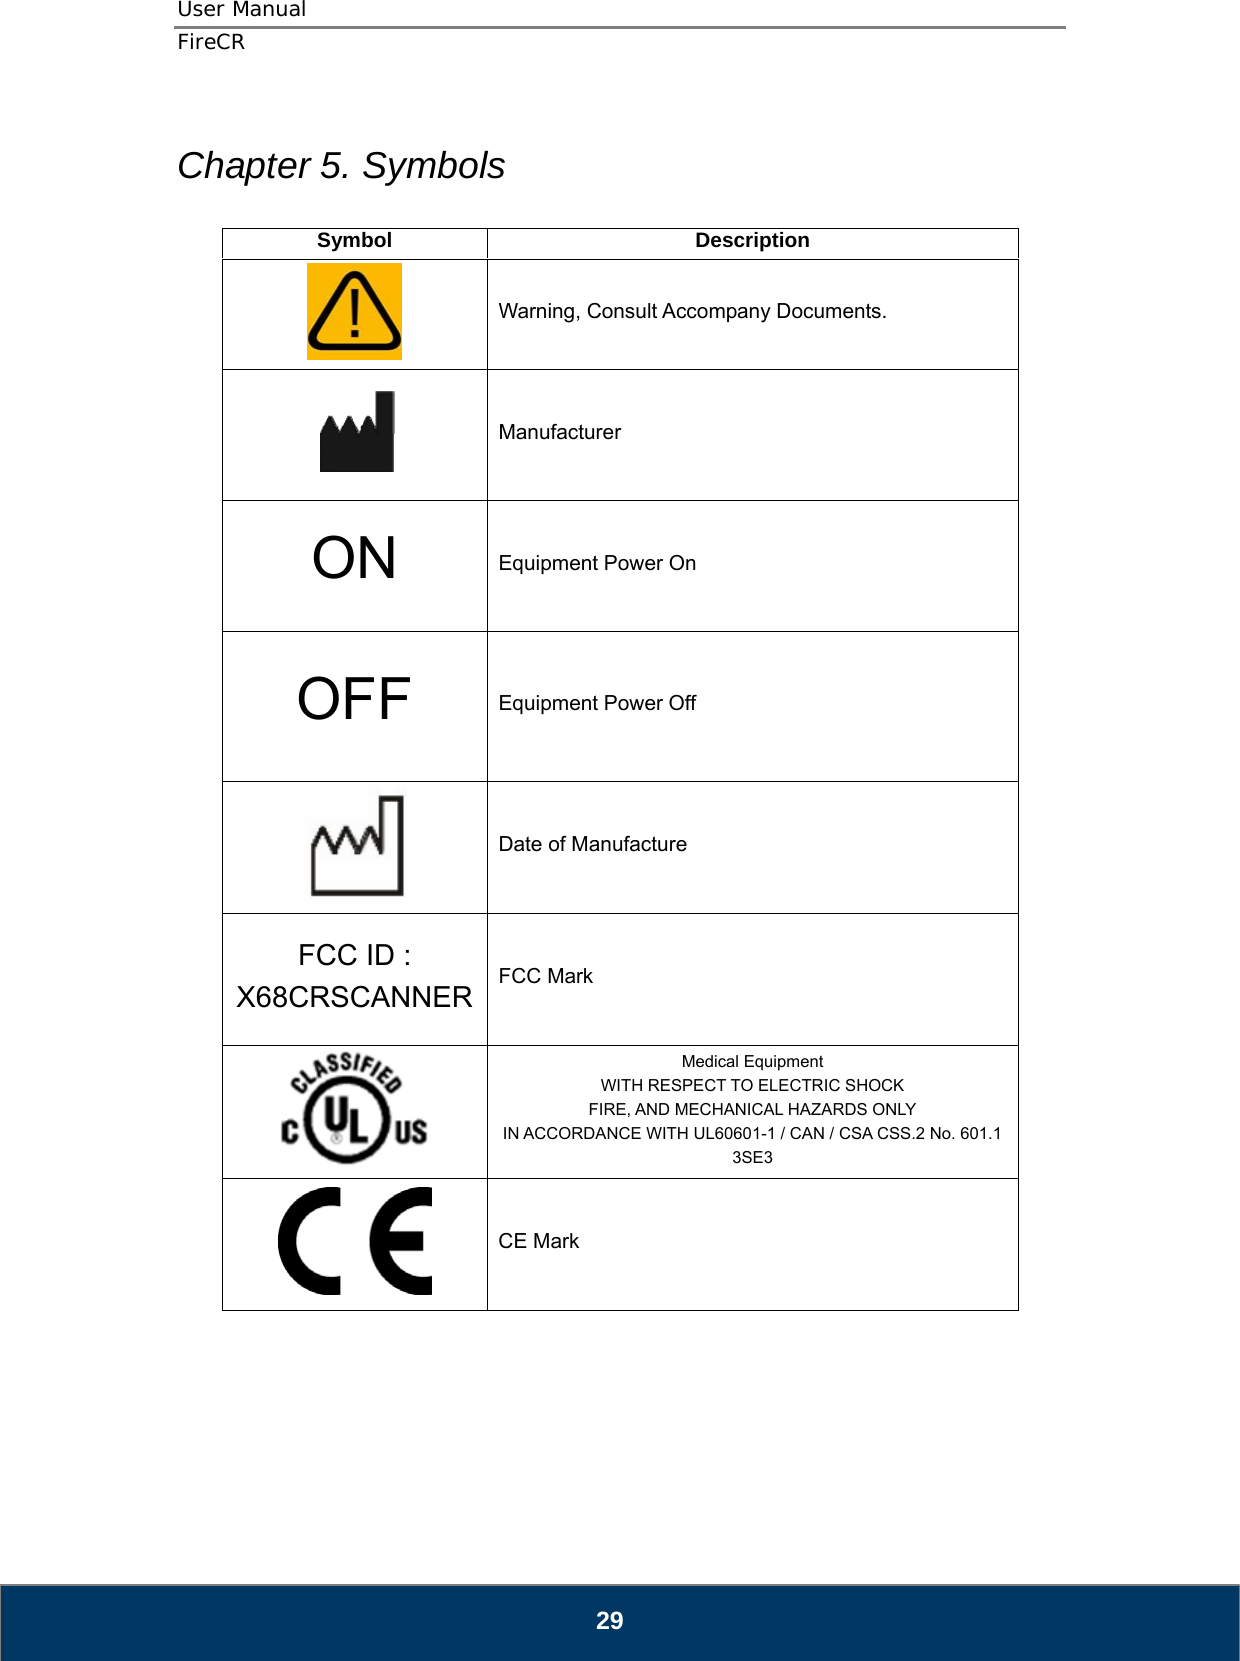 User Manual  FireCR  Chapter 5. Symbols  Symbol Description  Warning, Consult Accompany Documents.  Manufacturer ON  Equipment Power On OFF  Equipment Power Off  Date of Manufacture FCC ID : X68CRSCANNER  FCC Mark  Medical Equipment WITH RESPECT TO ELECTRIC SHOCK FIRE, AND MECHANICAL HAZARDS ONLY IN ACCORDANCE WITH UL60601-1 / CAN / CSA CSS.2 No. 601.1 3SE3  CE Mark        29 